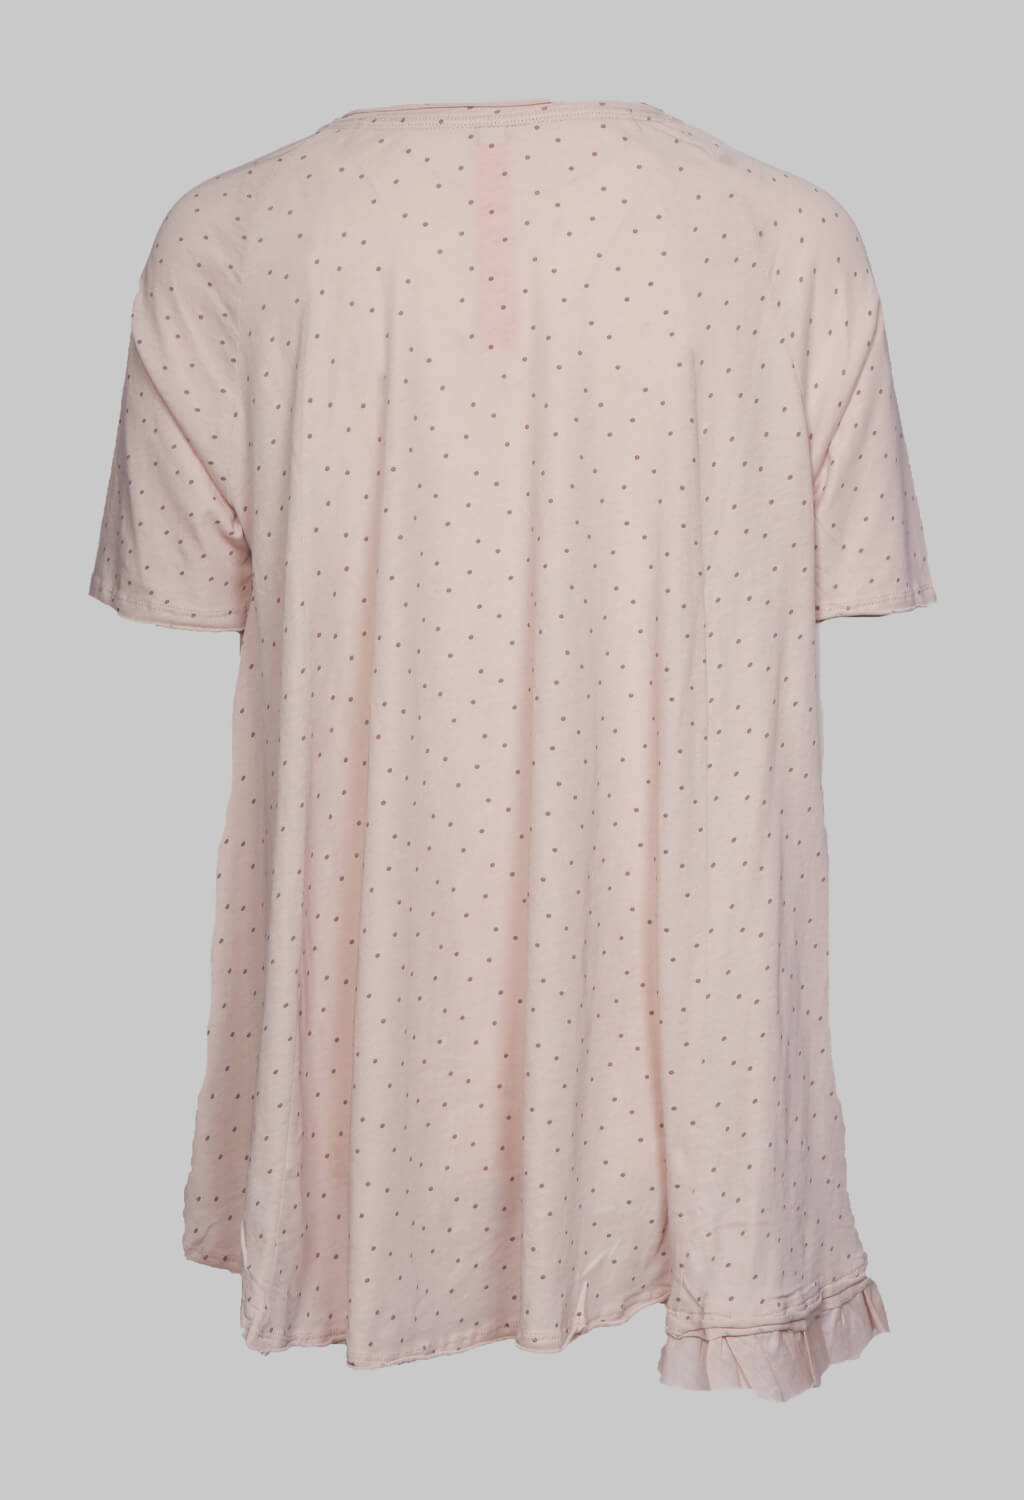 T-Shirt with High Low Hem in Dots